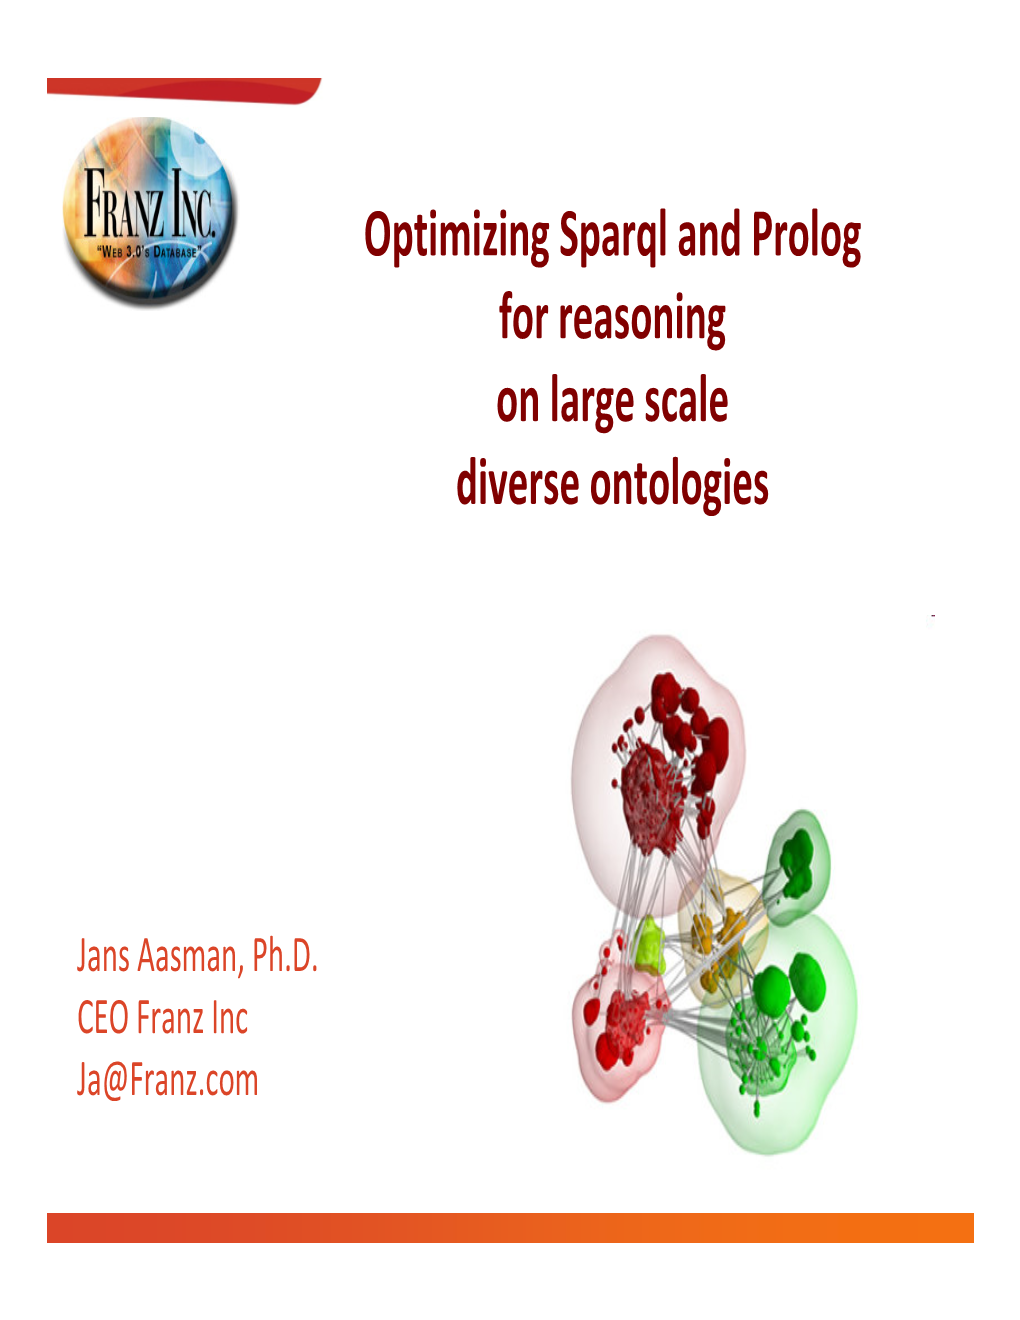 Optimizing Sparql and Prolog for Reasoning on Large Scale Diverse Ontologies